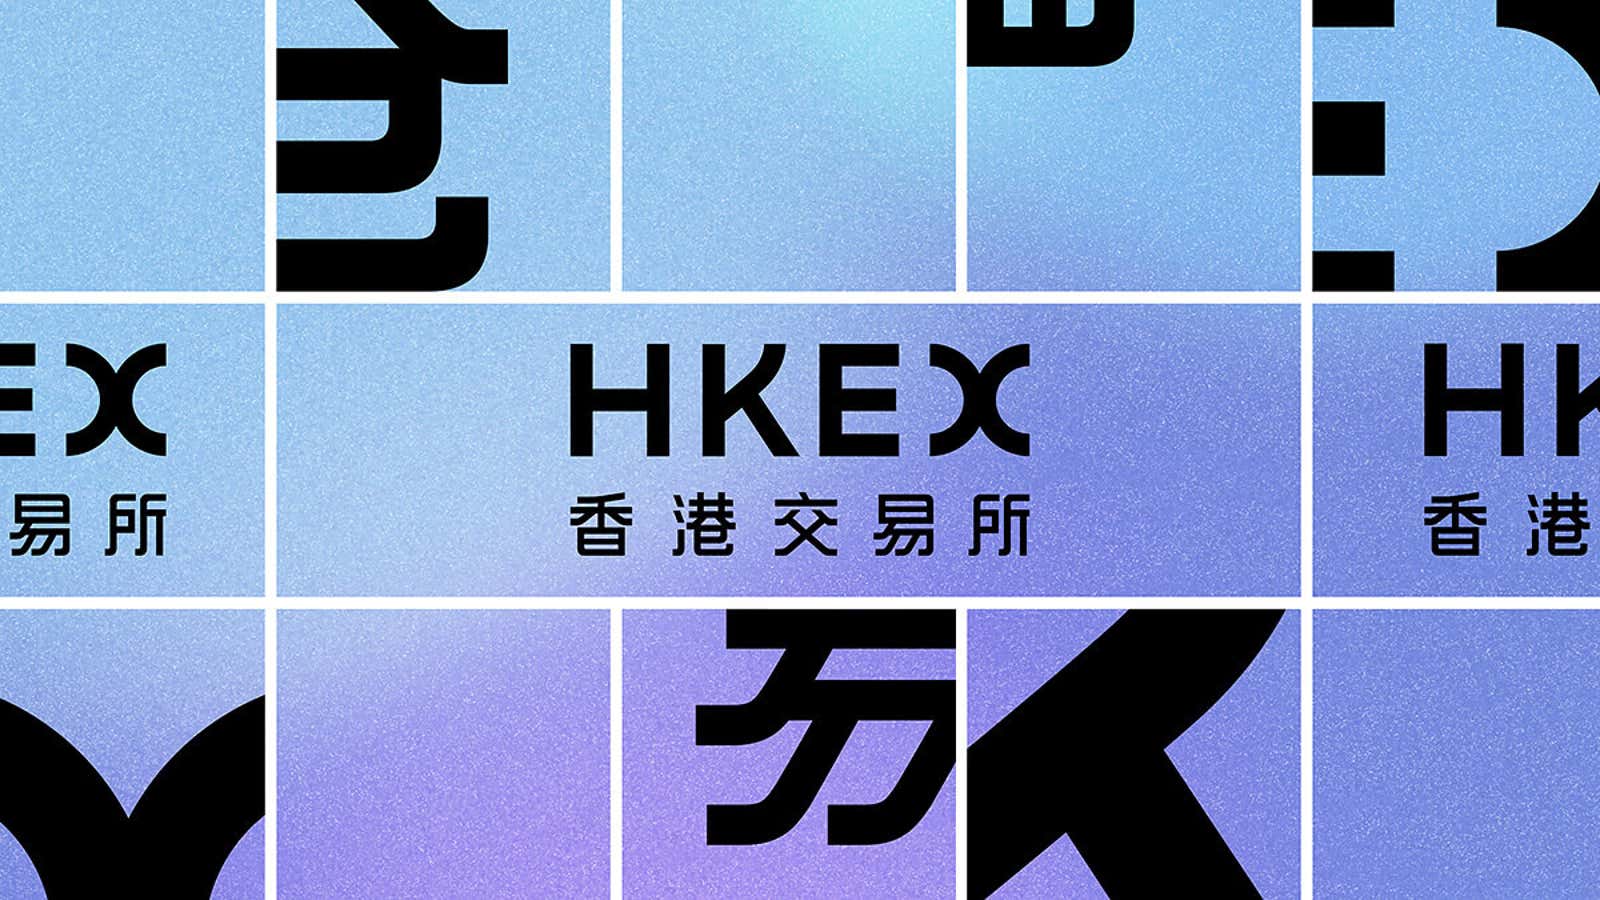 For members—HKEX’s “homecoming” ball